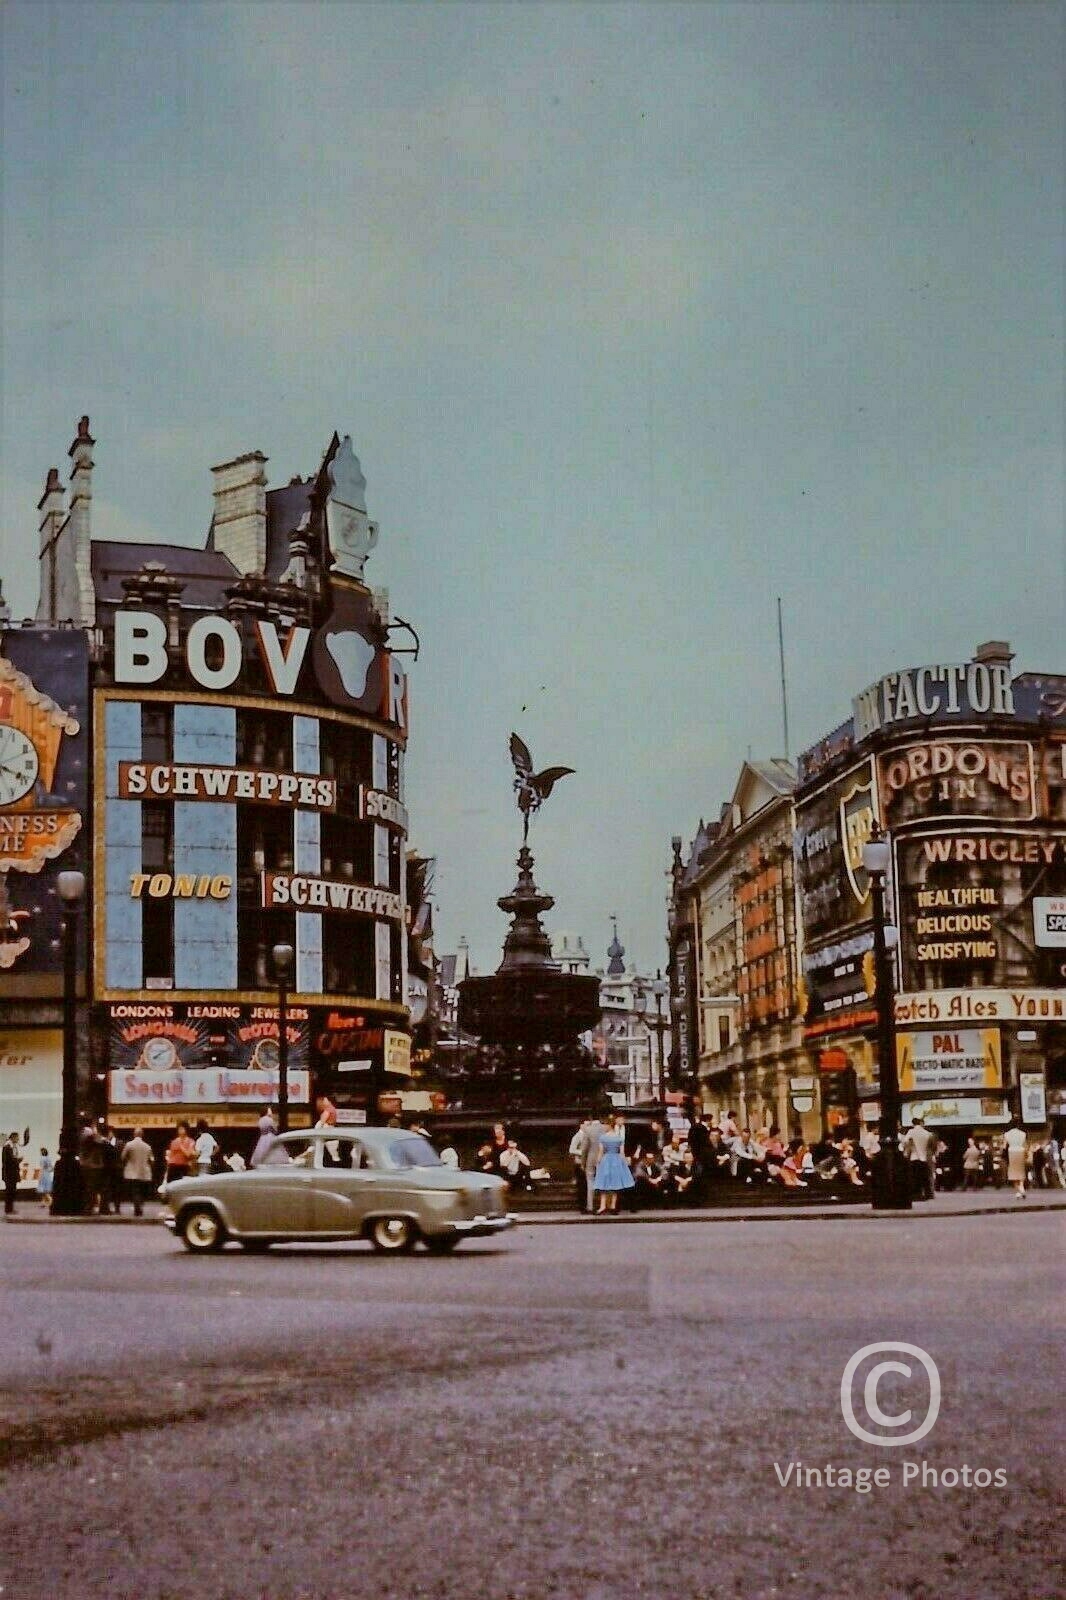 1950s Eros, Piccadilly Circus, London Sept 1959